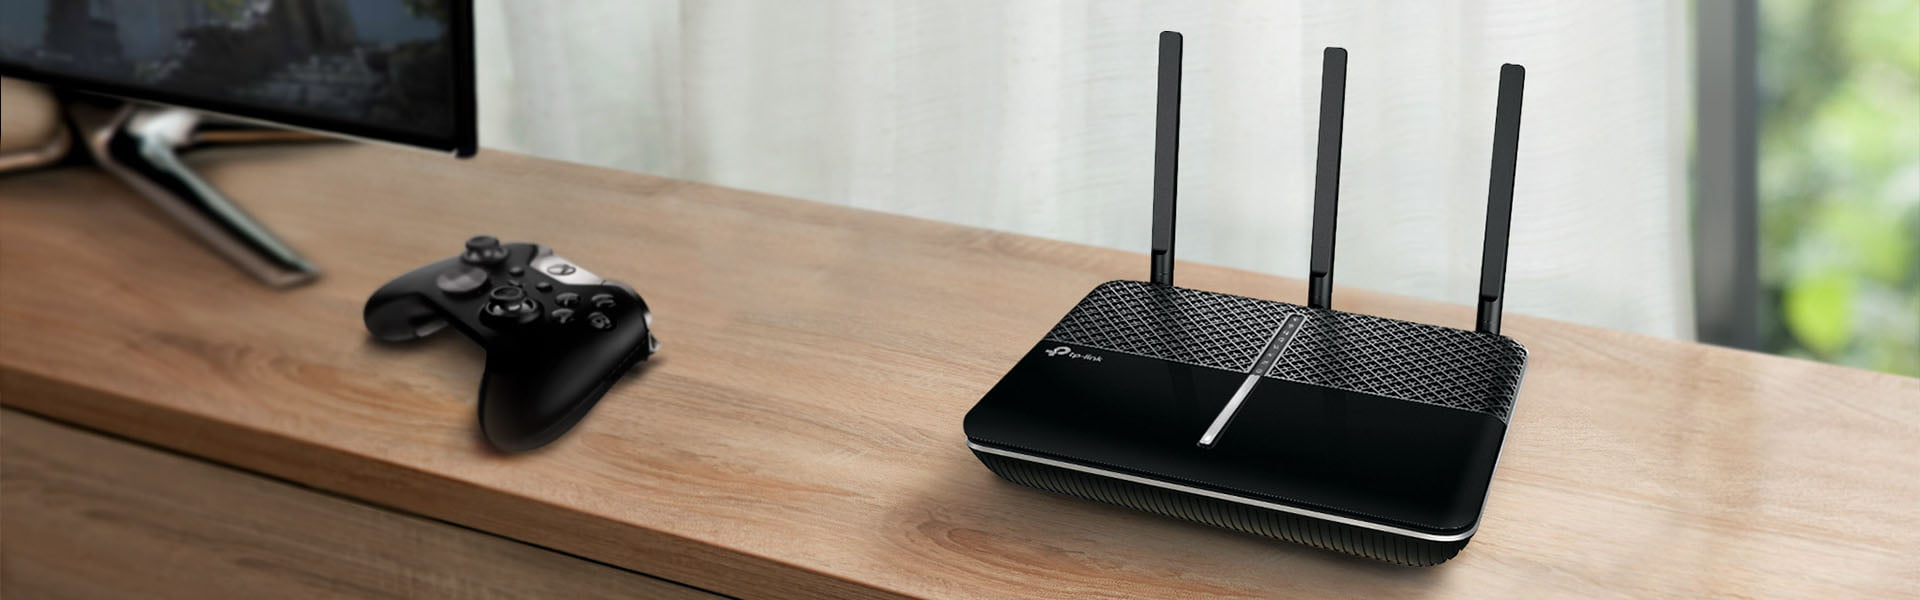 TP-Link Launches Archer C2300 MU-MIMO Wi-Fi Router 4